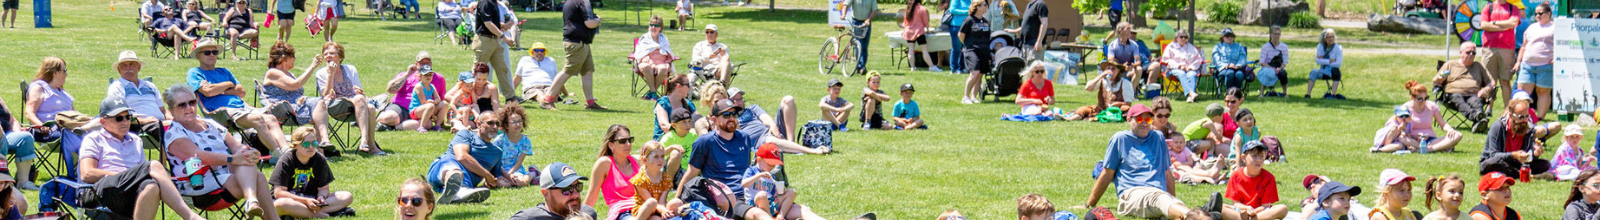 A crowd of people sit on the grass at Robert Simpson Park watching a performance